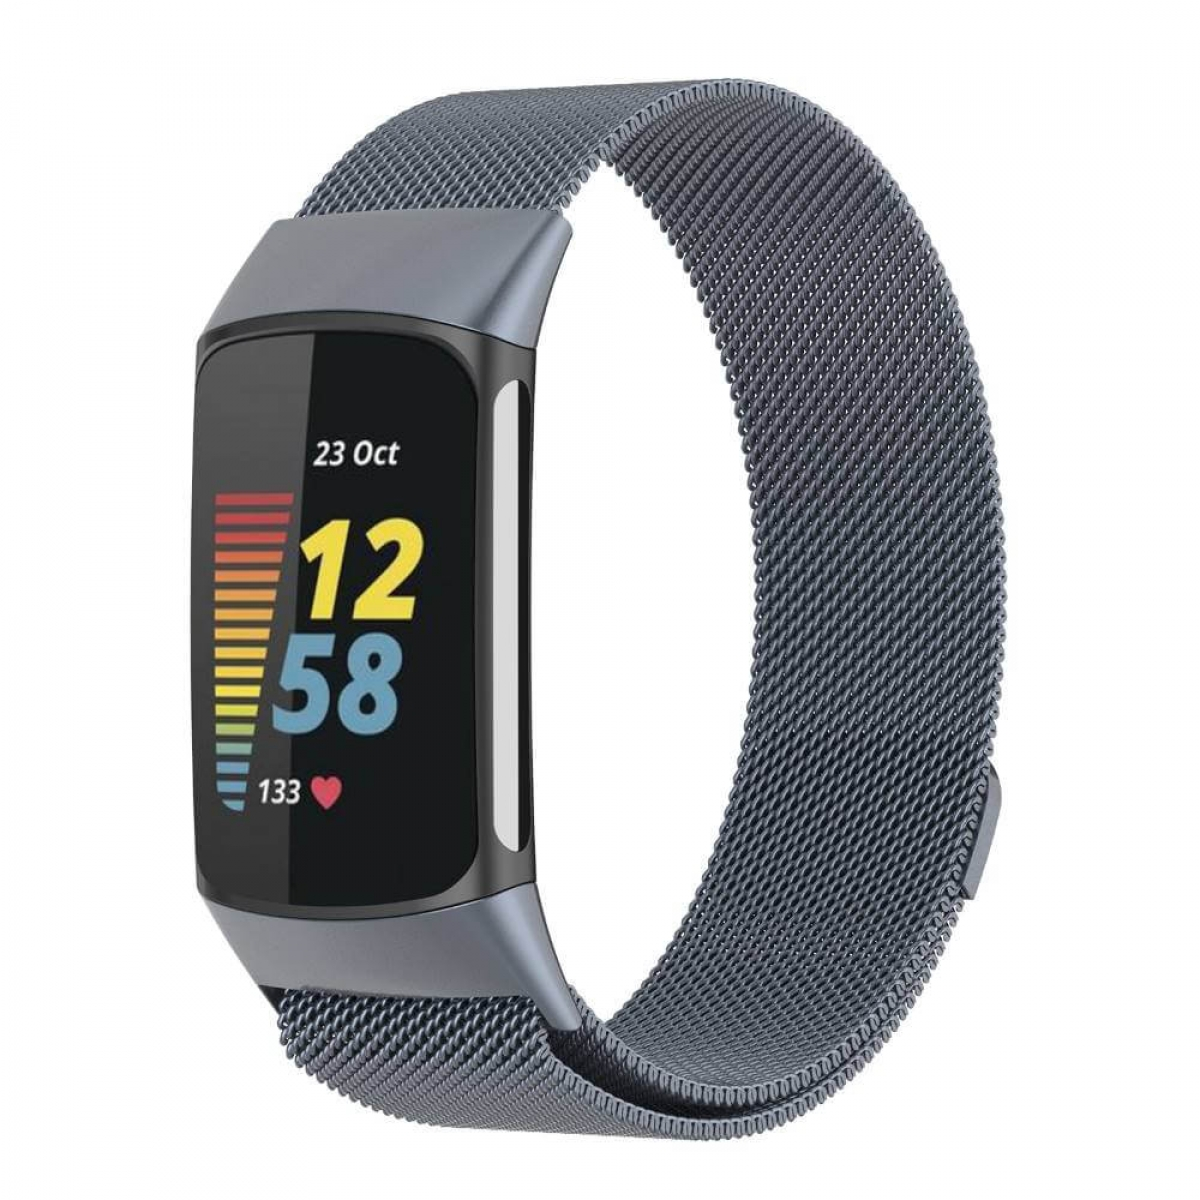 Charge Fitbit, Smartband, 5, Multicolor CASEONLINE Fitbit Milanaise,